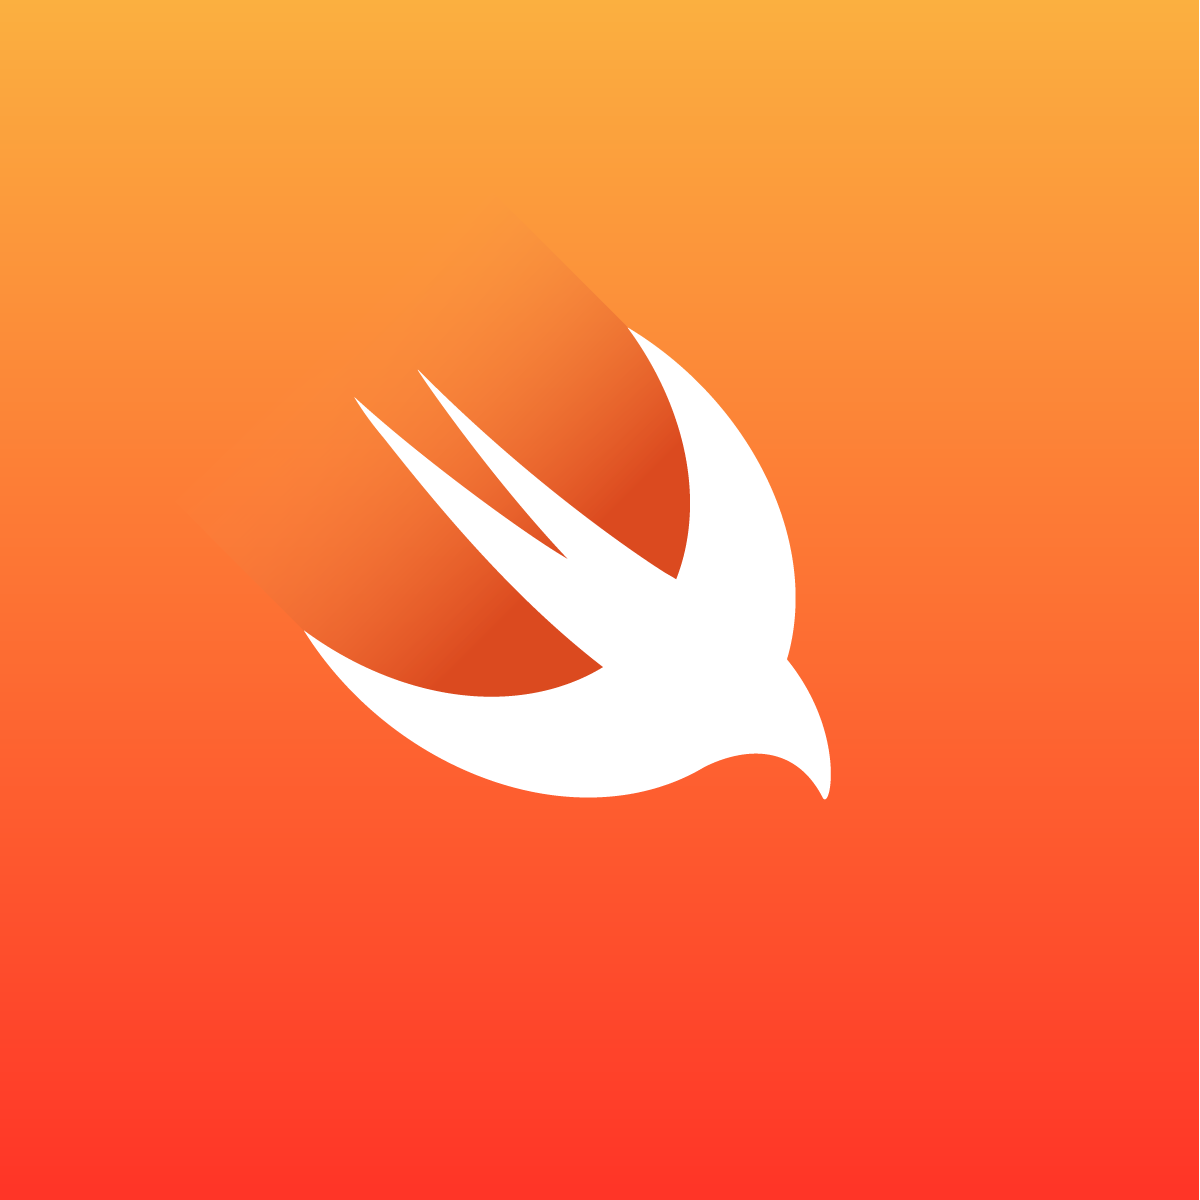 Creating reliable, concurrent apps with Swift